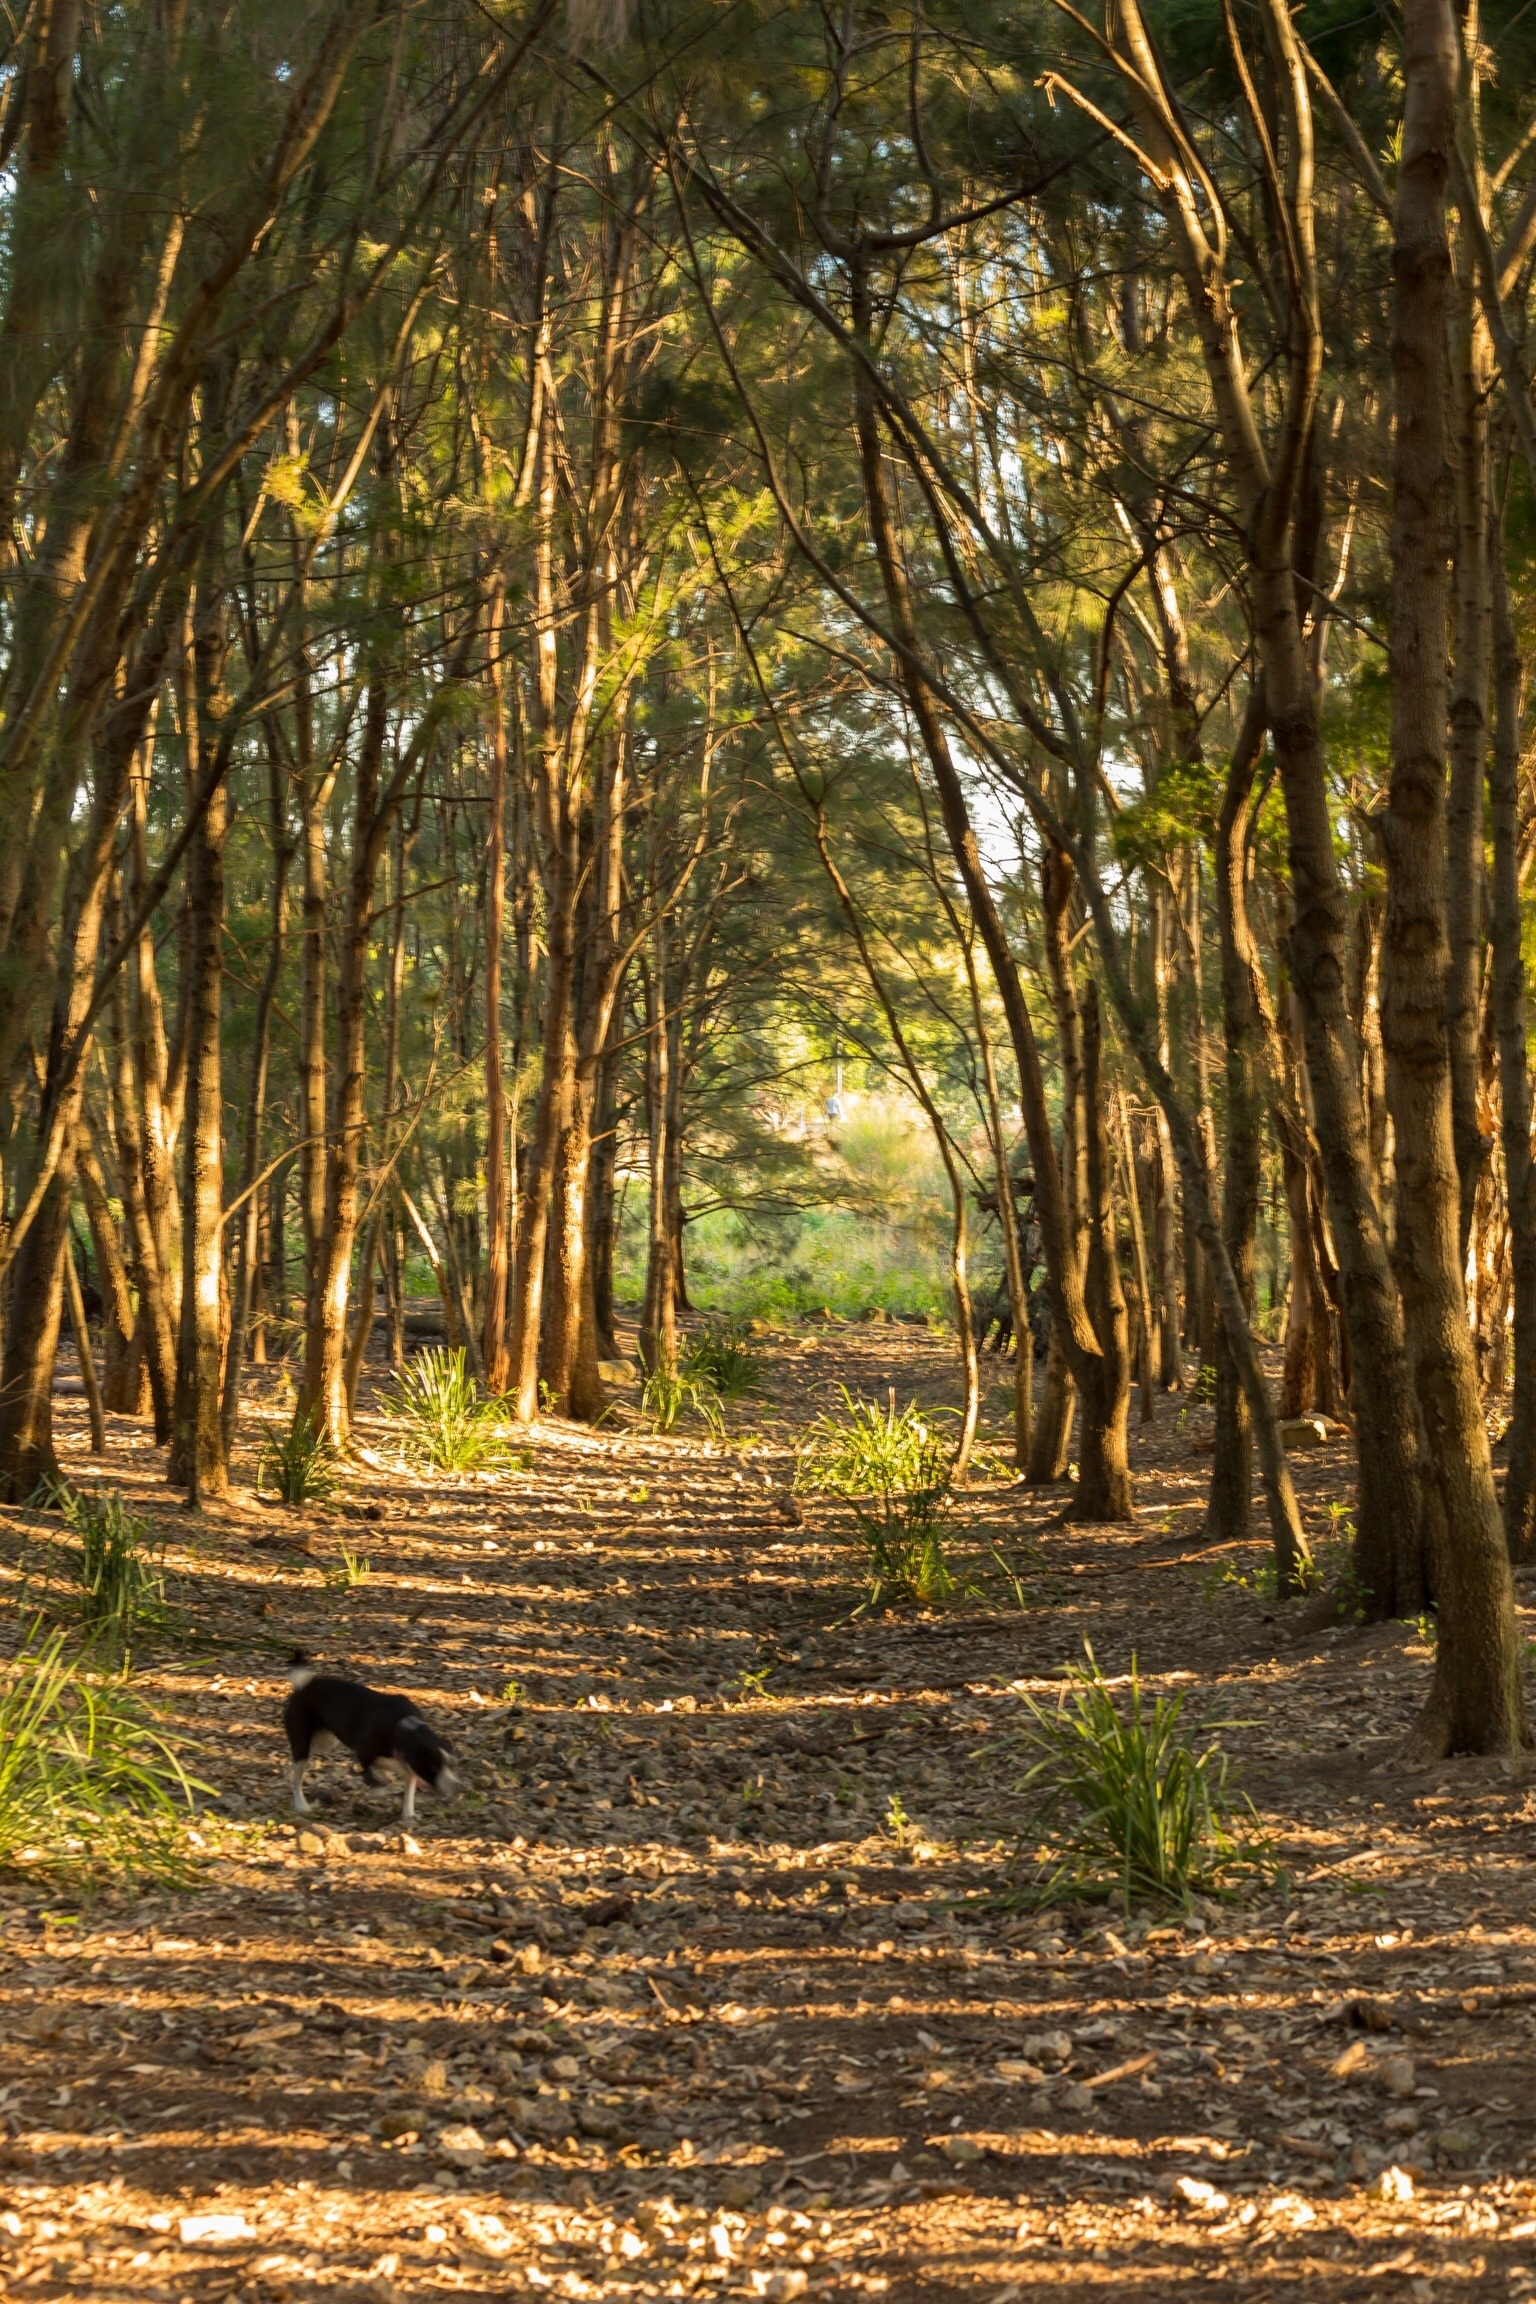 Less than 6km from the CBD, this little pocket of forest is a little oasis gem. A great spot to just unwind in an otherwise busy location. #hometown